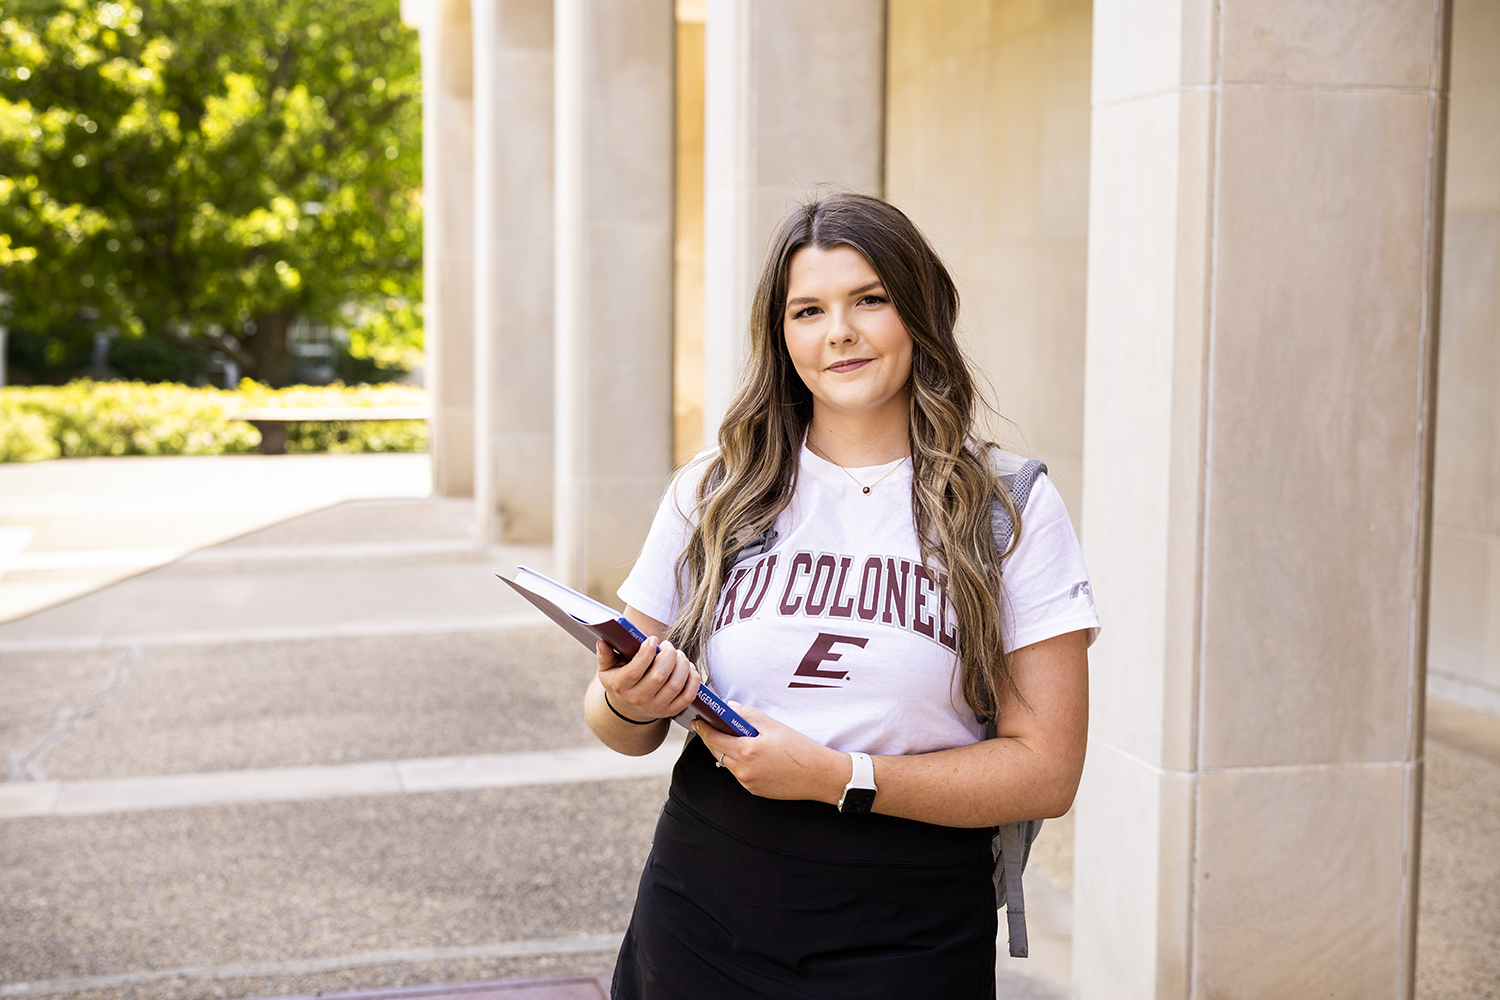 EKU BookSmart at Eastern Kentucky University saves students an estimated $1,200 per year on books and materials.